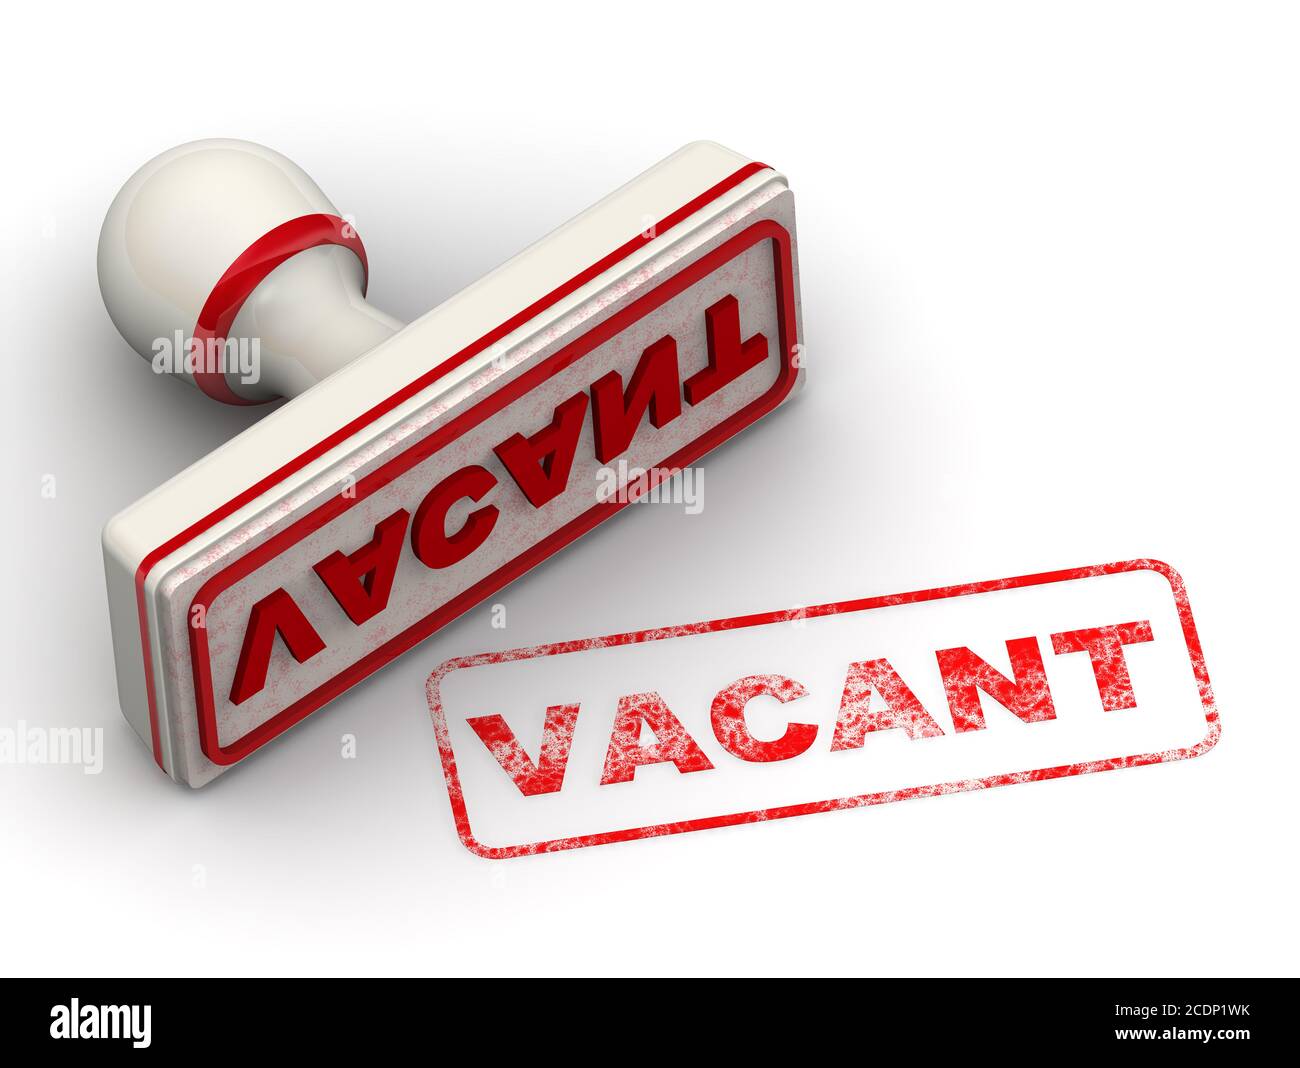 Vacant. The stamp and an imprint. The white seal and red imprint VACANT on white surface. 3D illustration Stock Photo